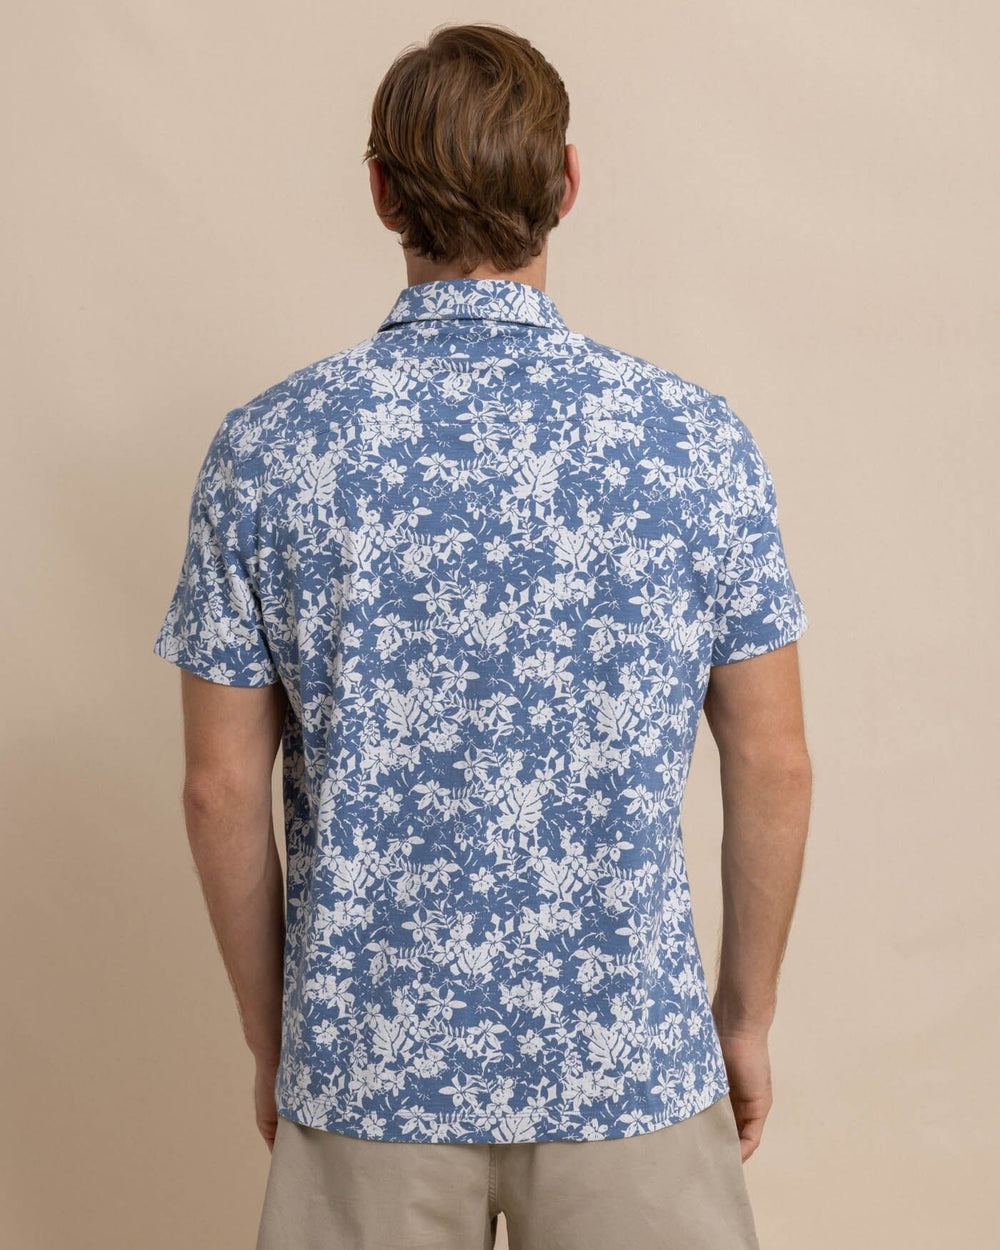 The back view of the Southern Tide Beachcast Island Blooms Knit Short Sleeve Sport Shirt by Southern Tide - Coronet Blue